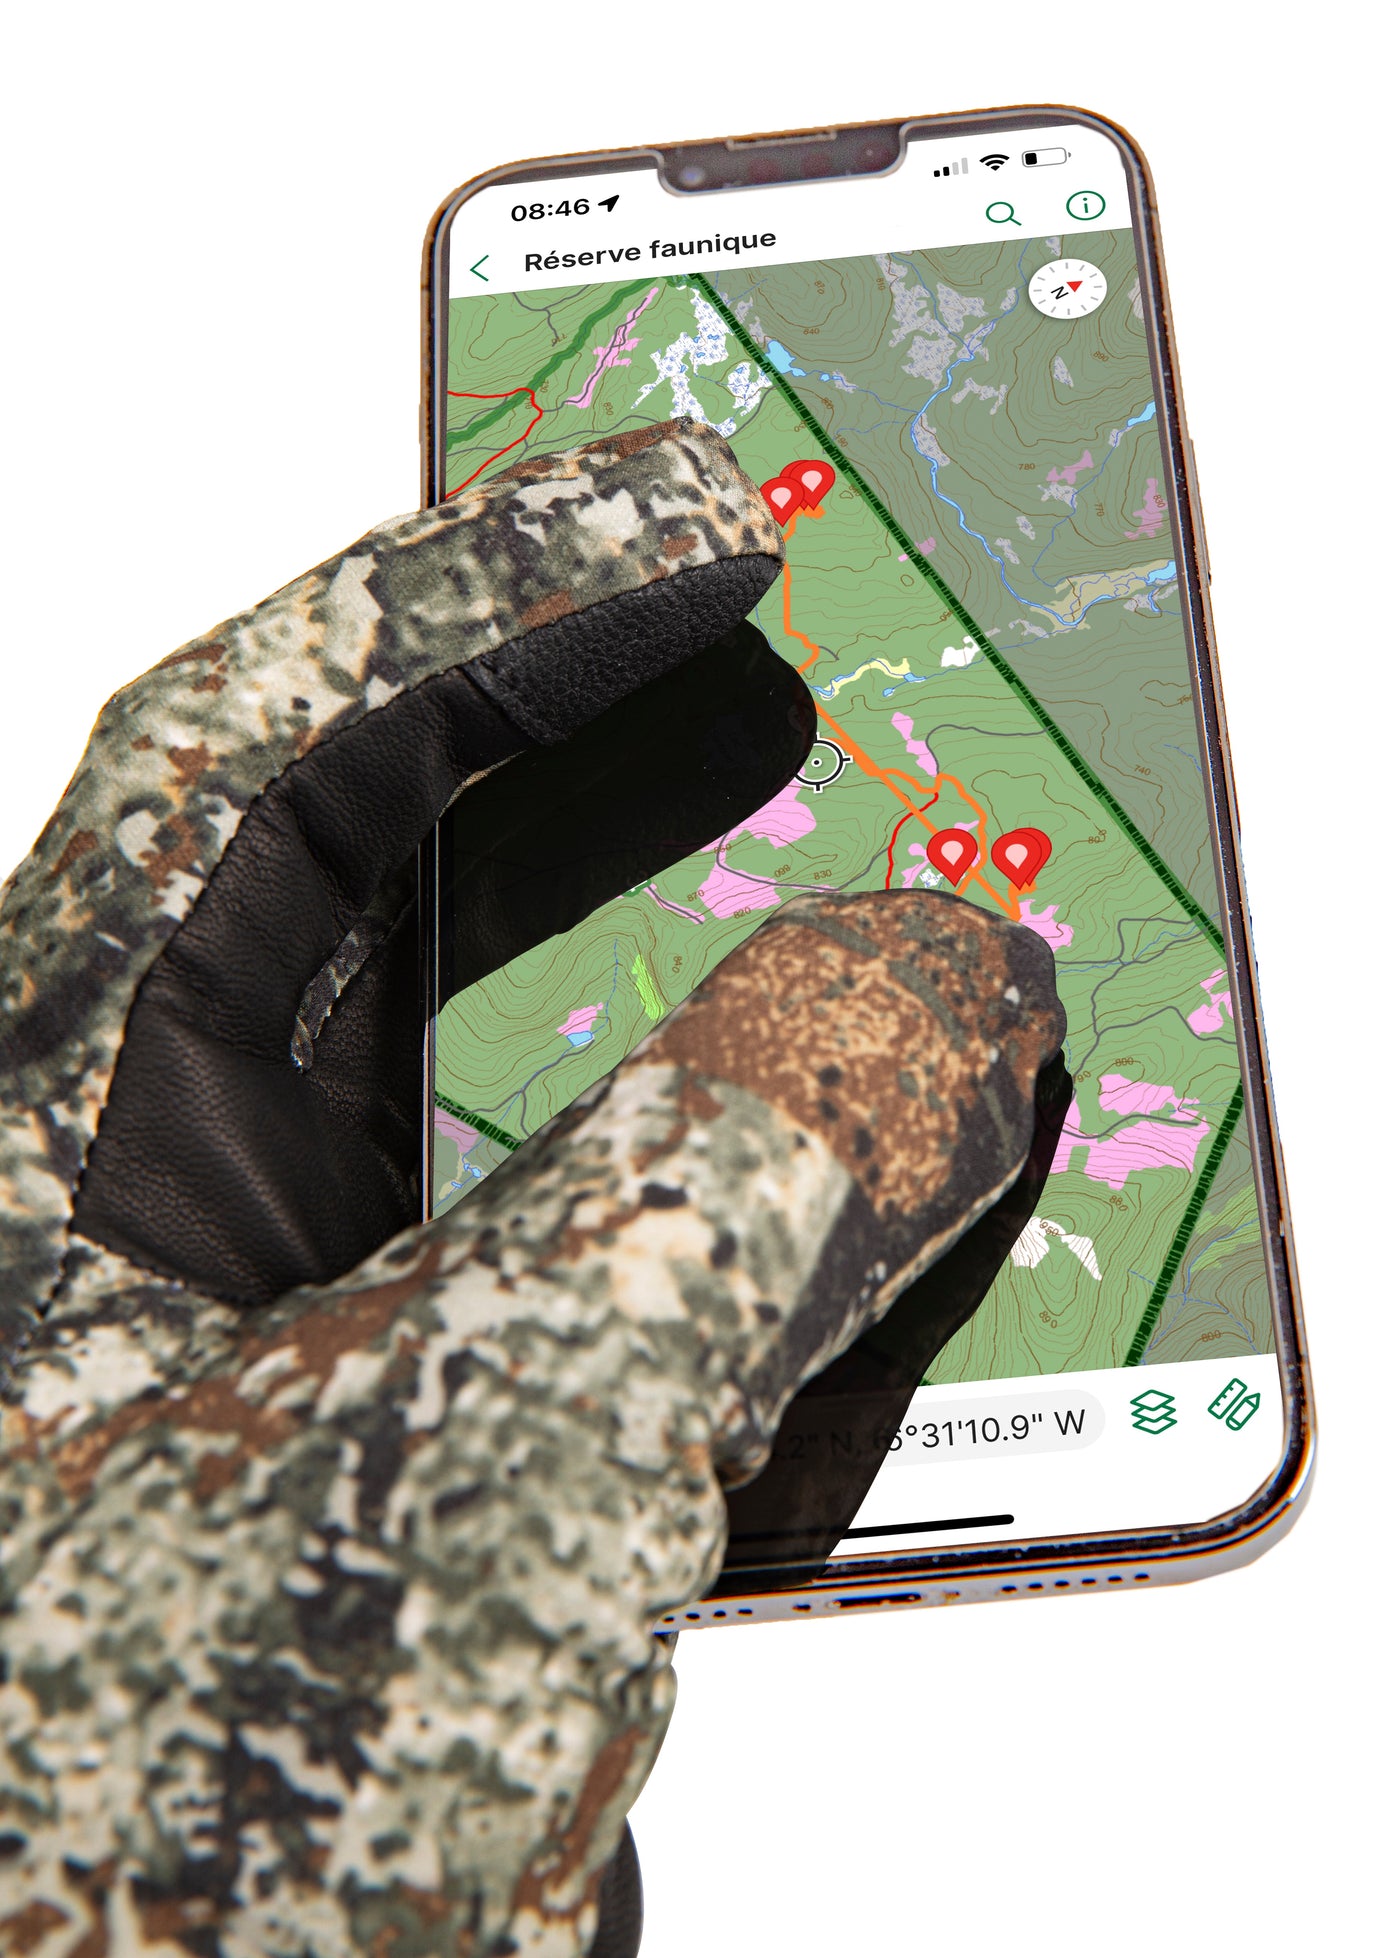 Women's Hunting Gloves "Trapline" camo The Ripper by Sportchief